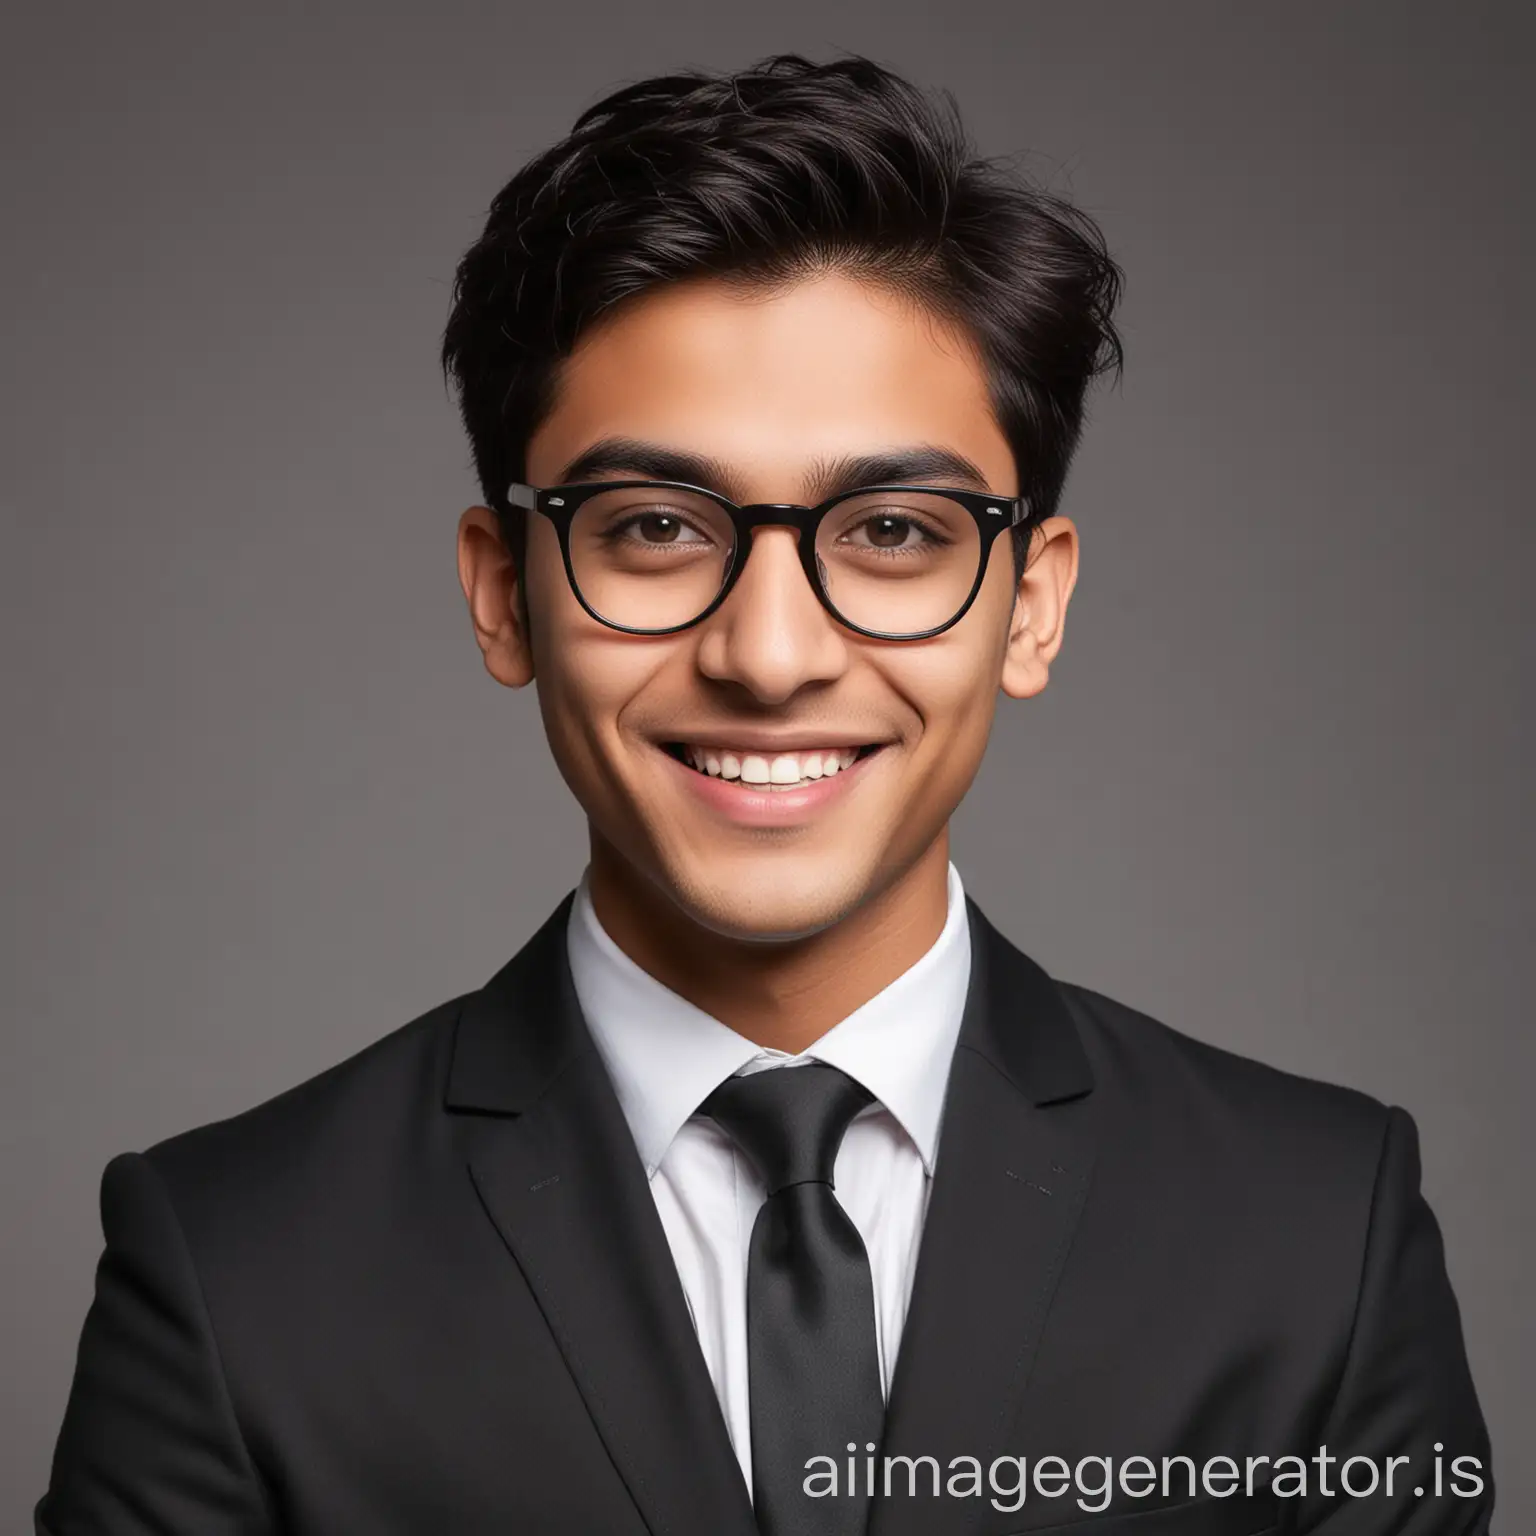 Young-Indian-Man-in-Black-Suit-Posing-Professionally-for-LinkedIn-Profile-Picture